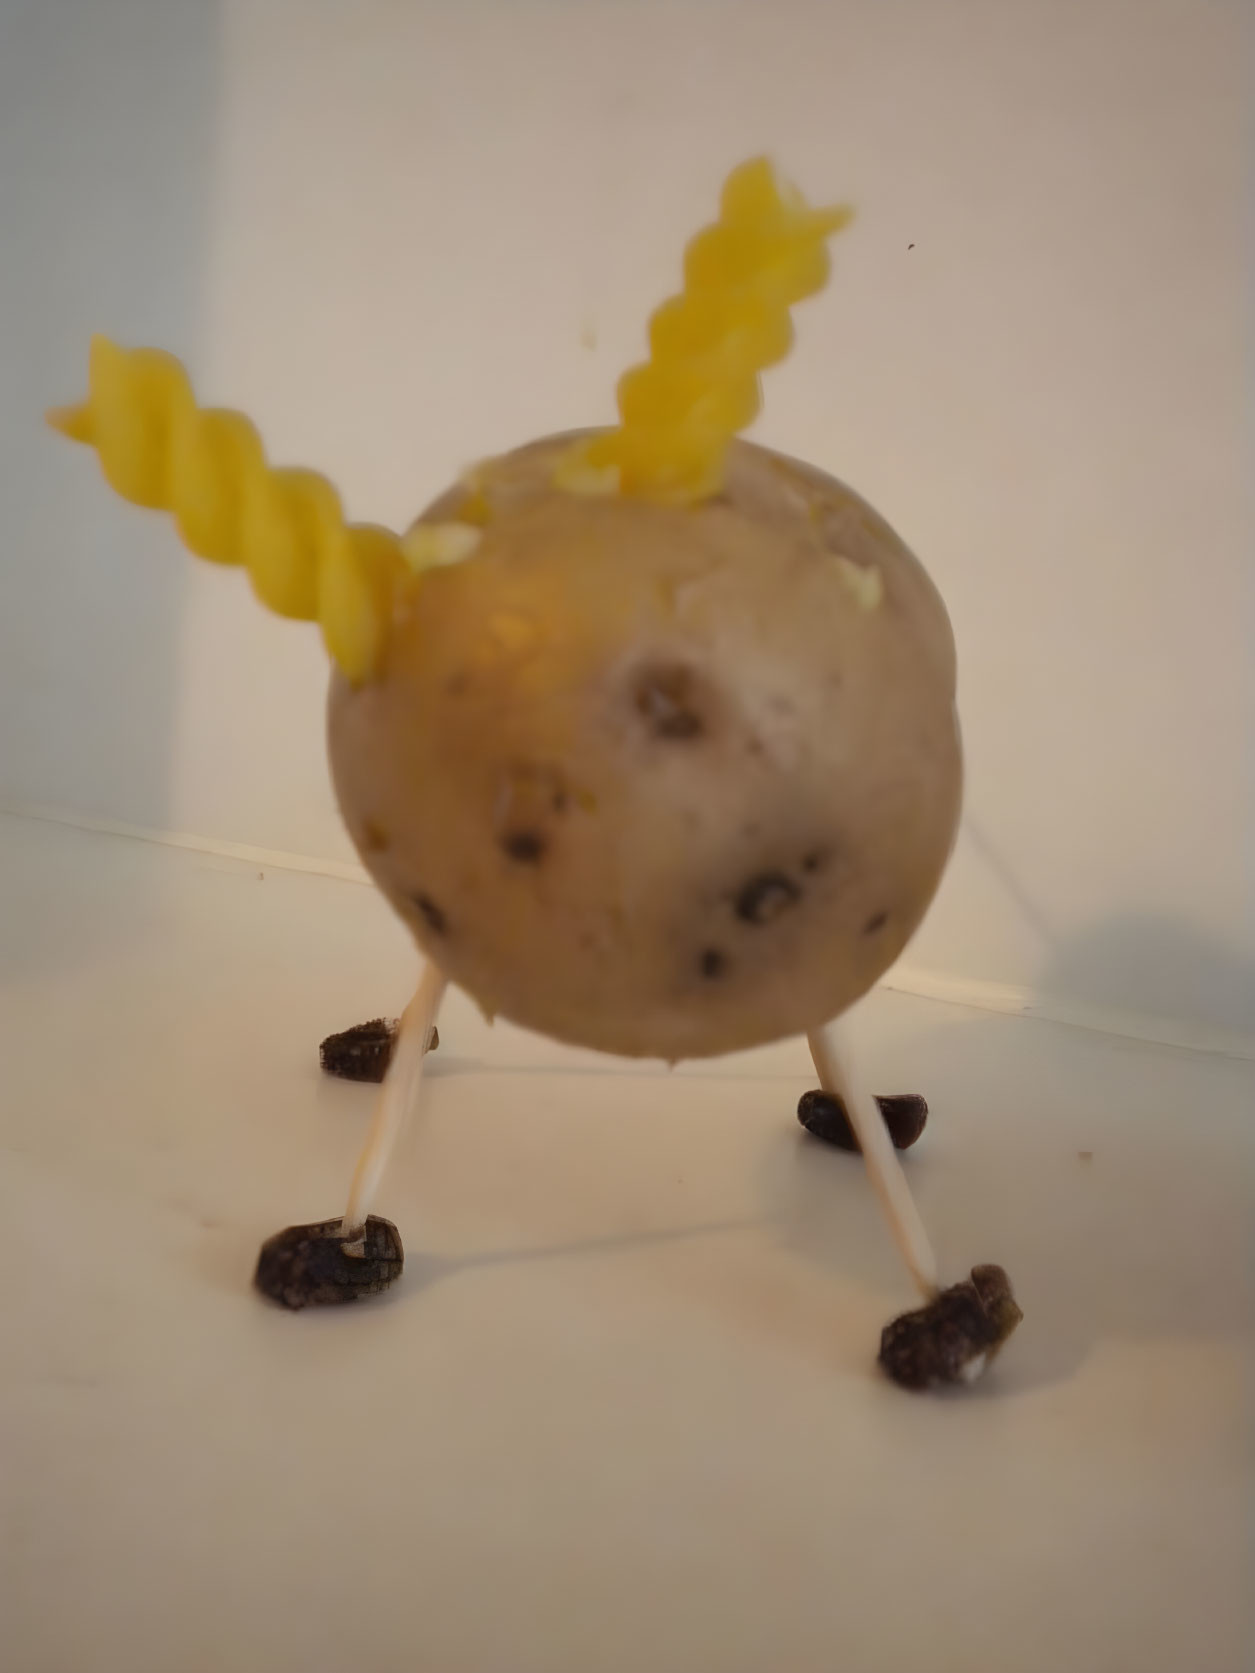 Potato with Pasta Spirals Horns and Raisin Feet on White Surface